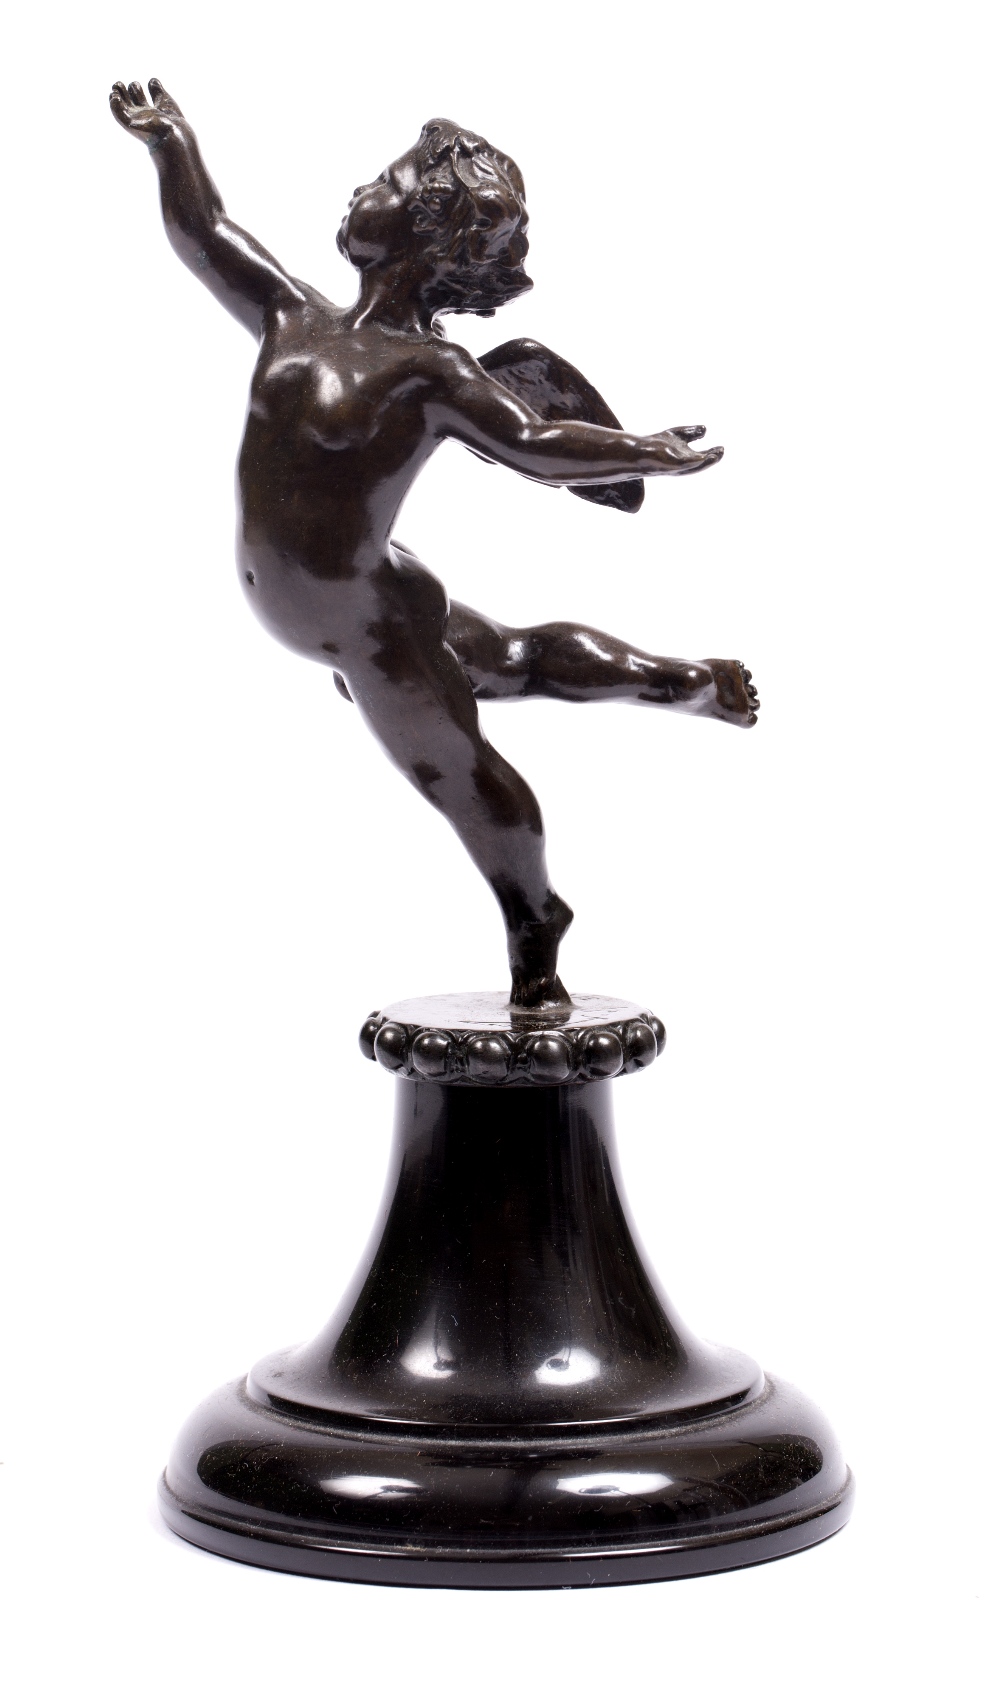 A 20TH CENTURY BRONZE SCULPTURE of a Cherub, indistinctly signed, Limited Edition out of 3/150 on